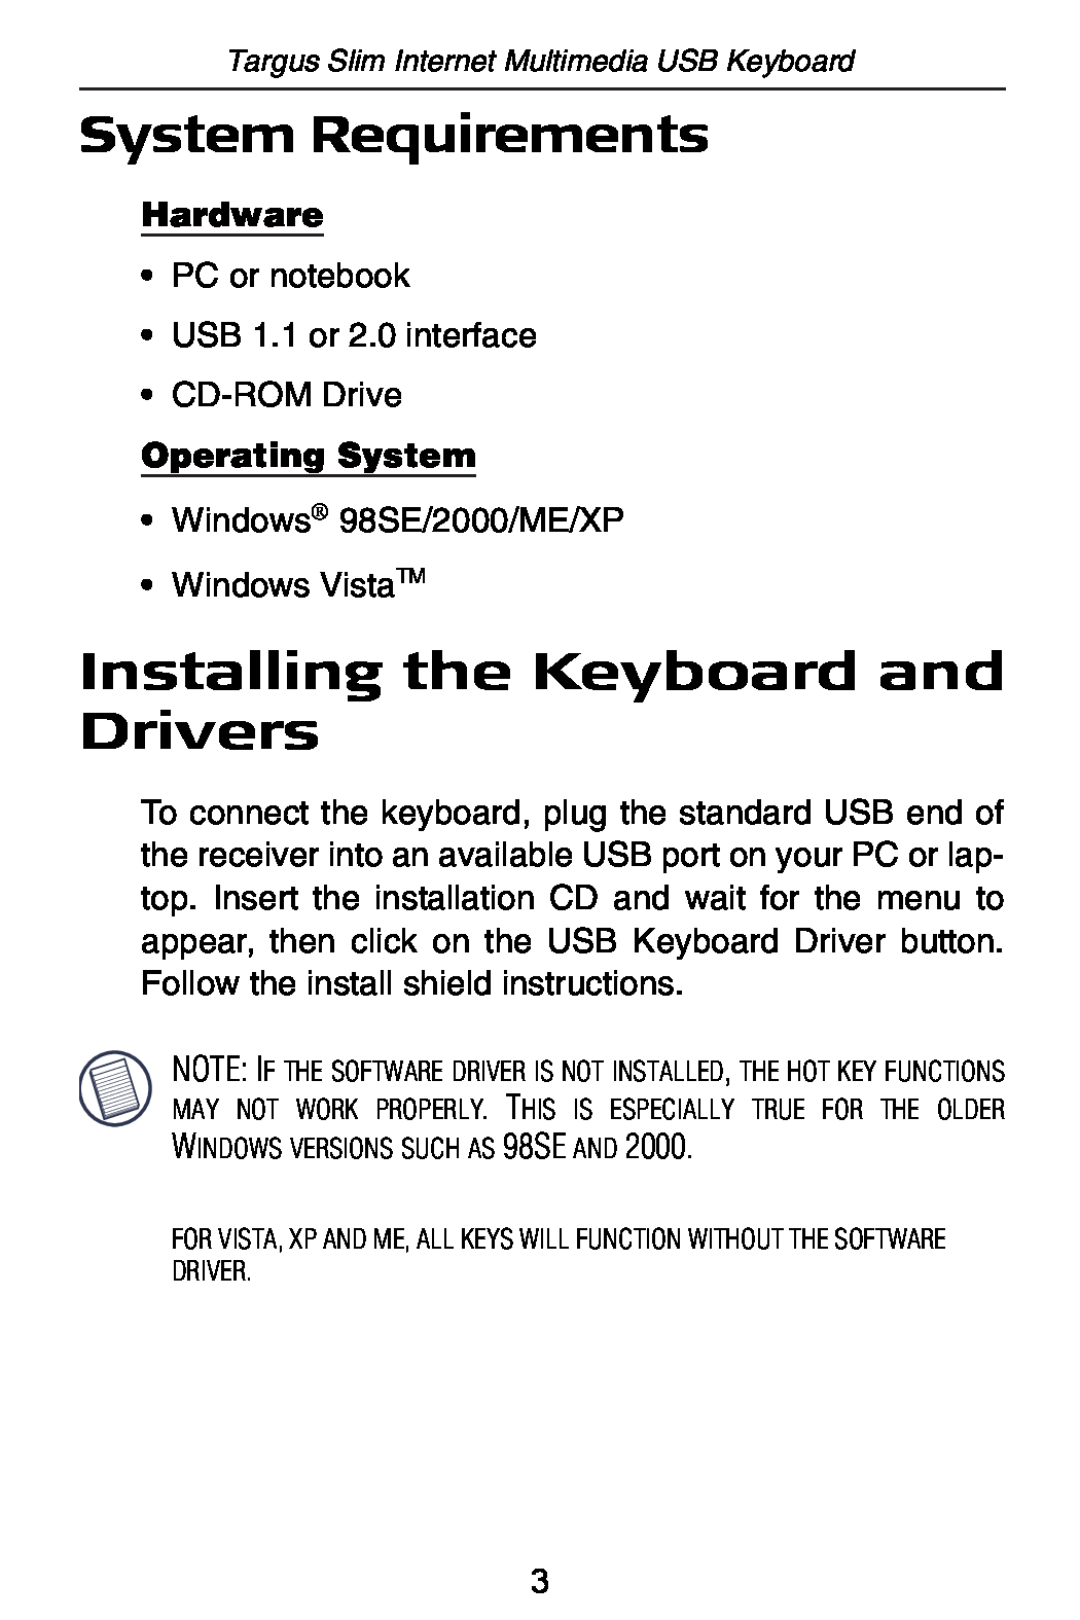 Targus slim internet multimedia USB keyboard System Requirements, Installing the Keyboard and Drivers, Hardware 